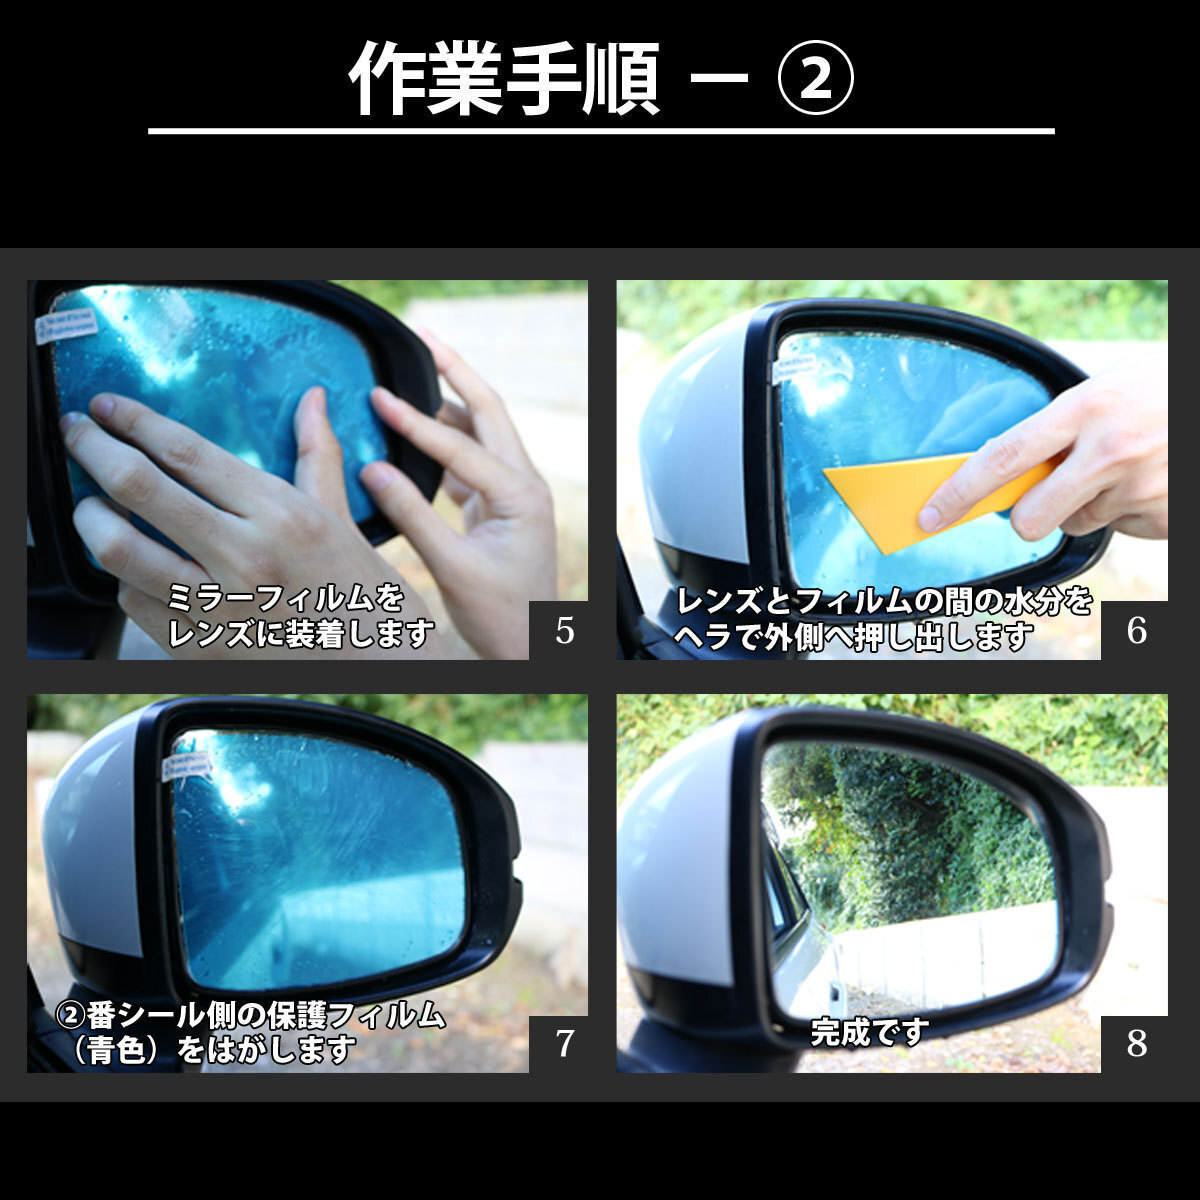  postage 185 jpy car make exclusive use Benz W204 07/06~09/07 exclusive use water-repellent door mirror film left right set water-repellent effect 6 months shipping deadline 18 hour 